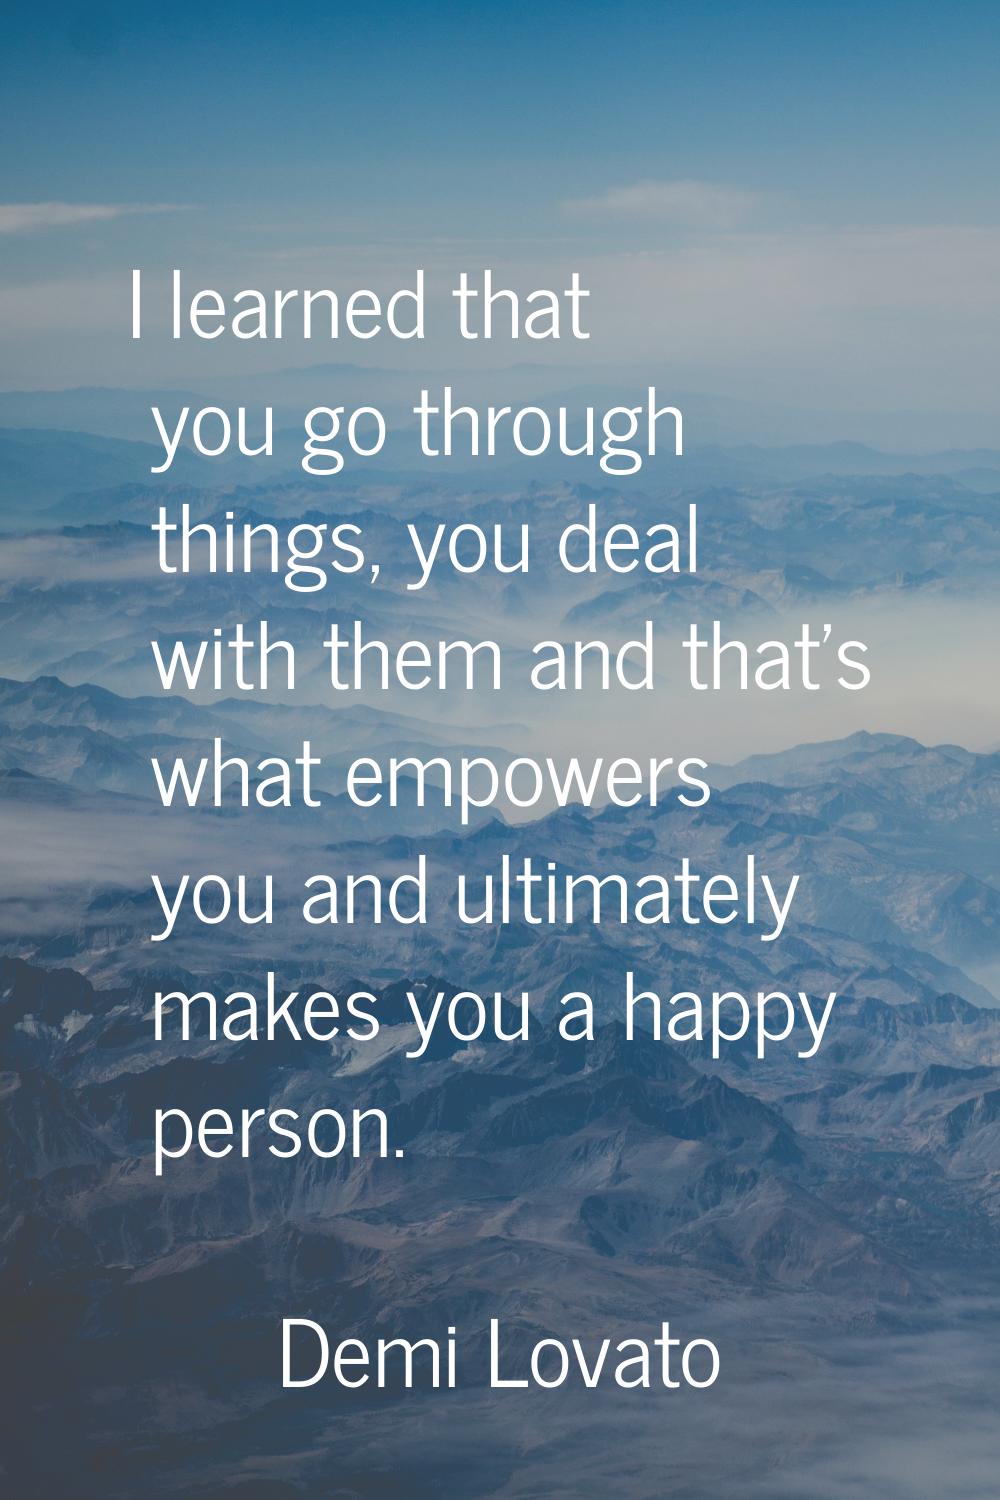 I learned that you go through things, you deal with them and that's what empowers you and ultimatel